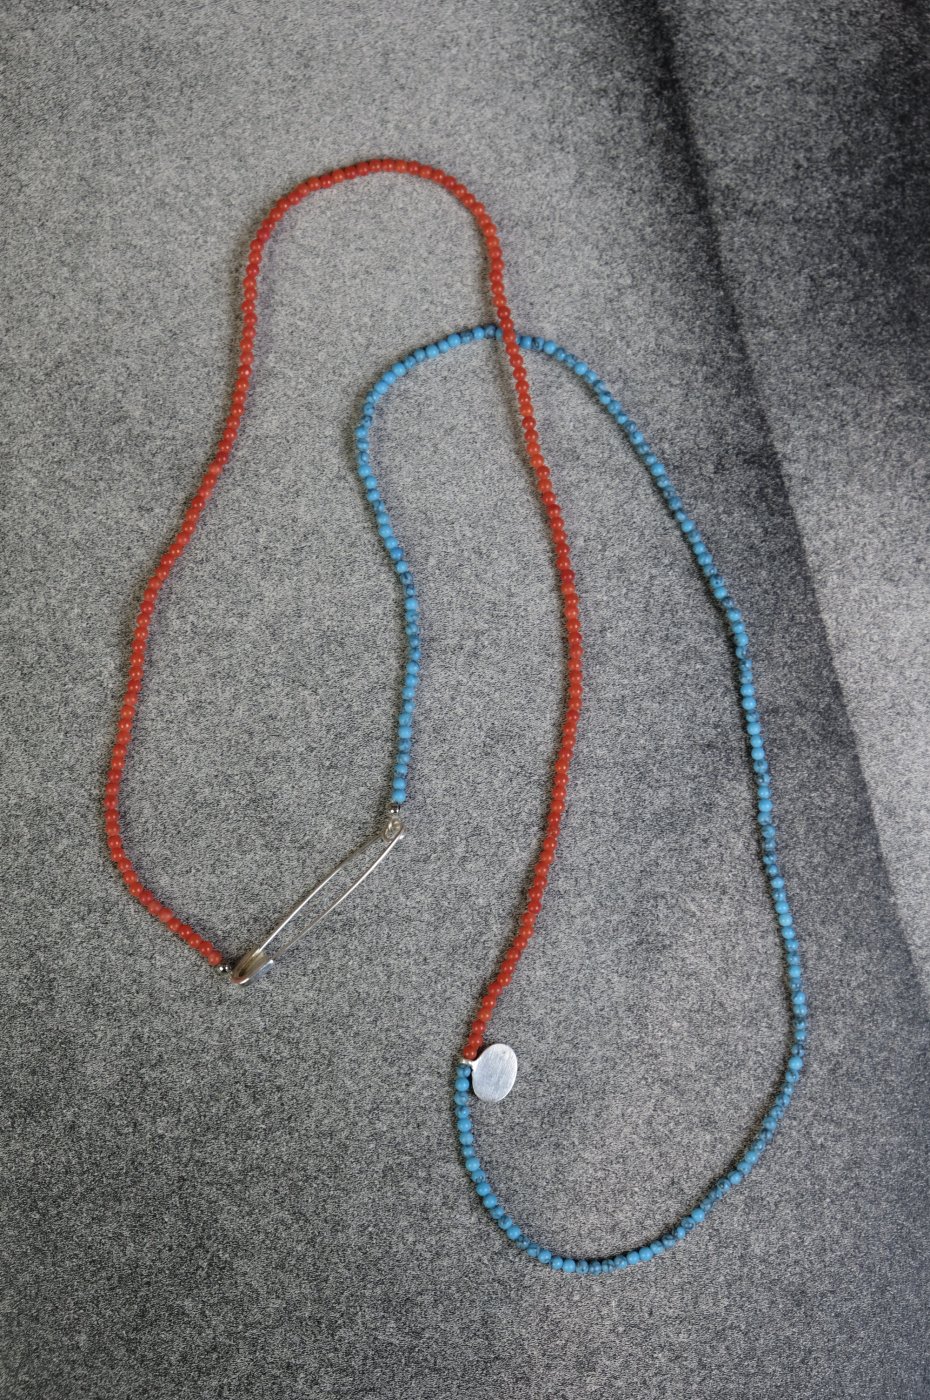 NOMA t.d. -ノーマティーディ-PIN & BEADS NECKLACE-SILVER / TURQUOISE x RED